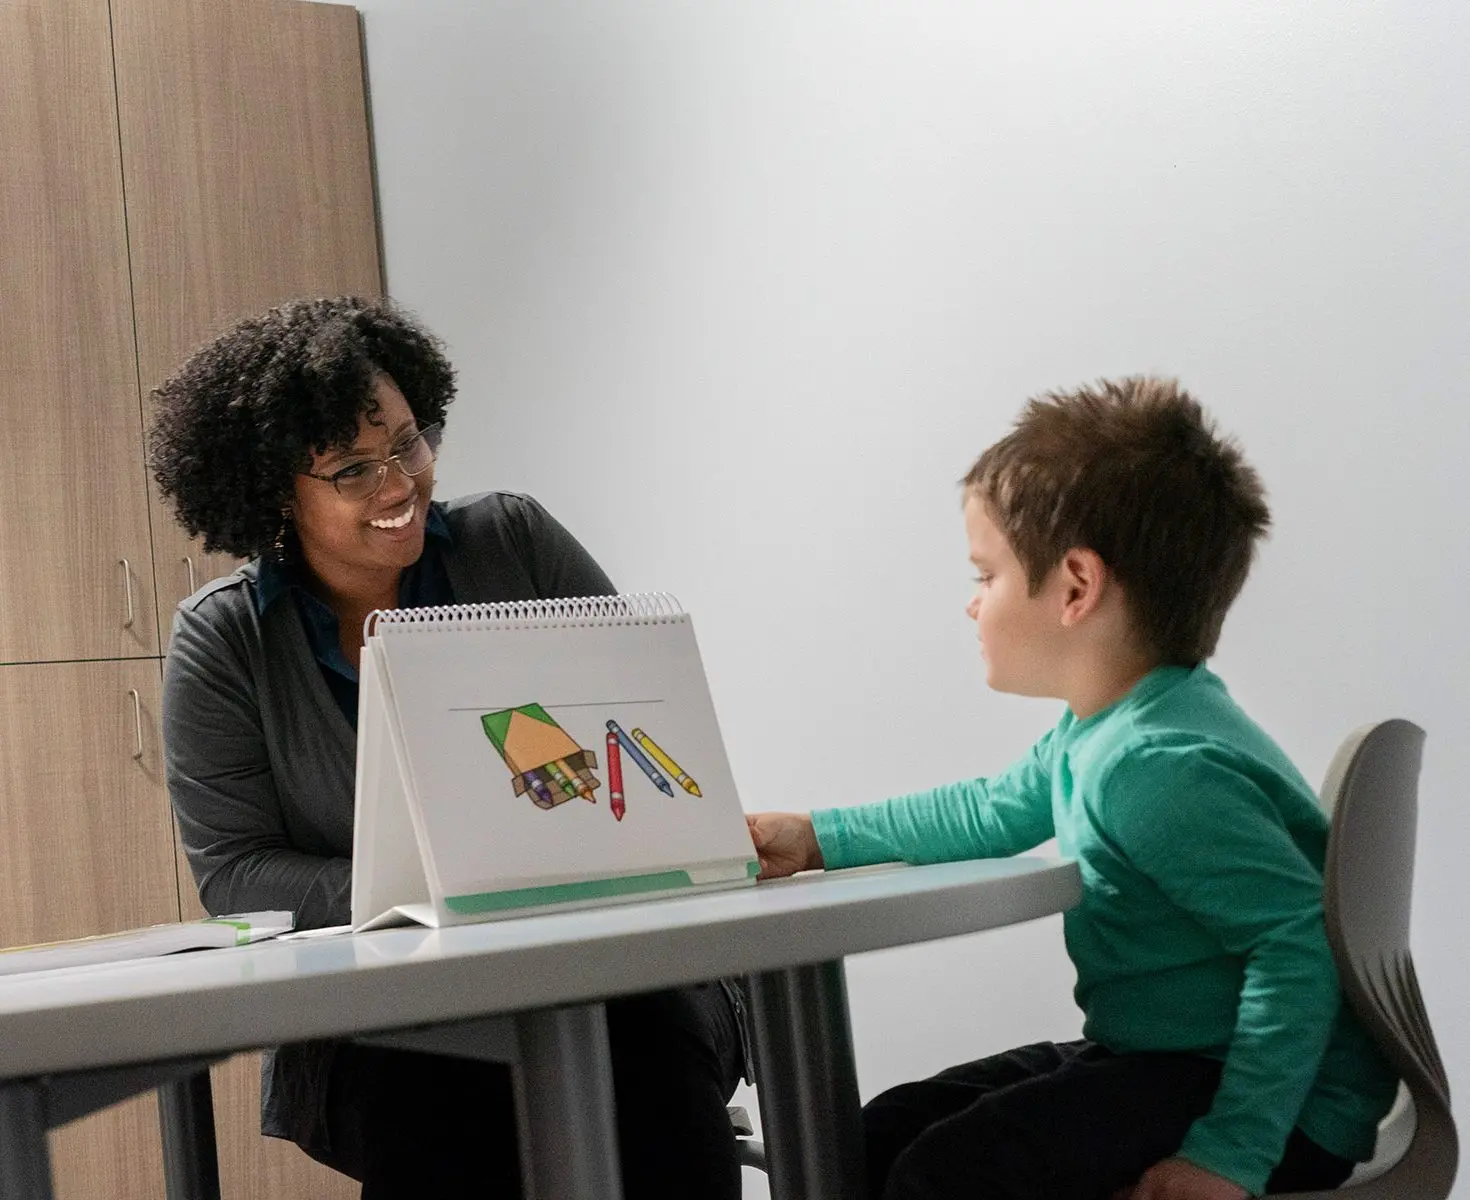 Speech therapist student in Early Childhood Education Program works with a child patient.